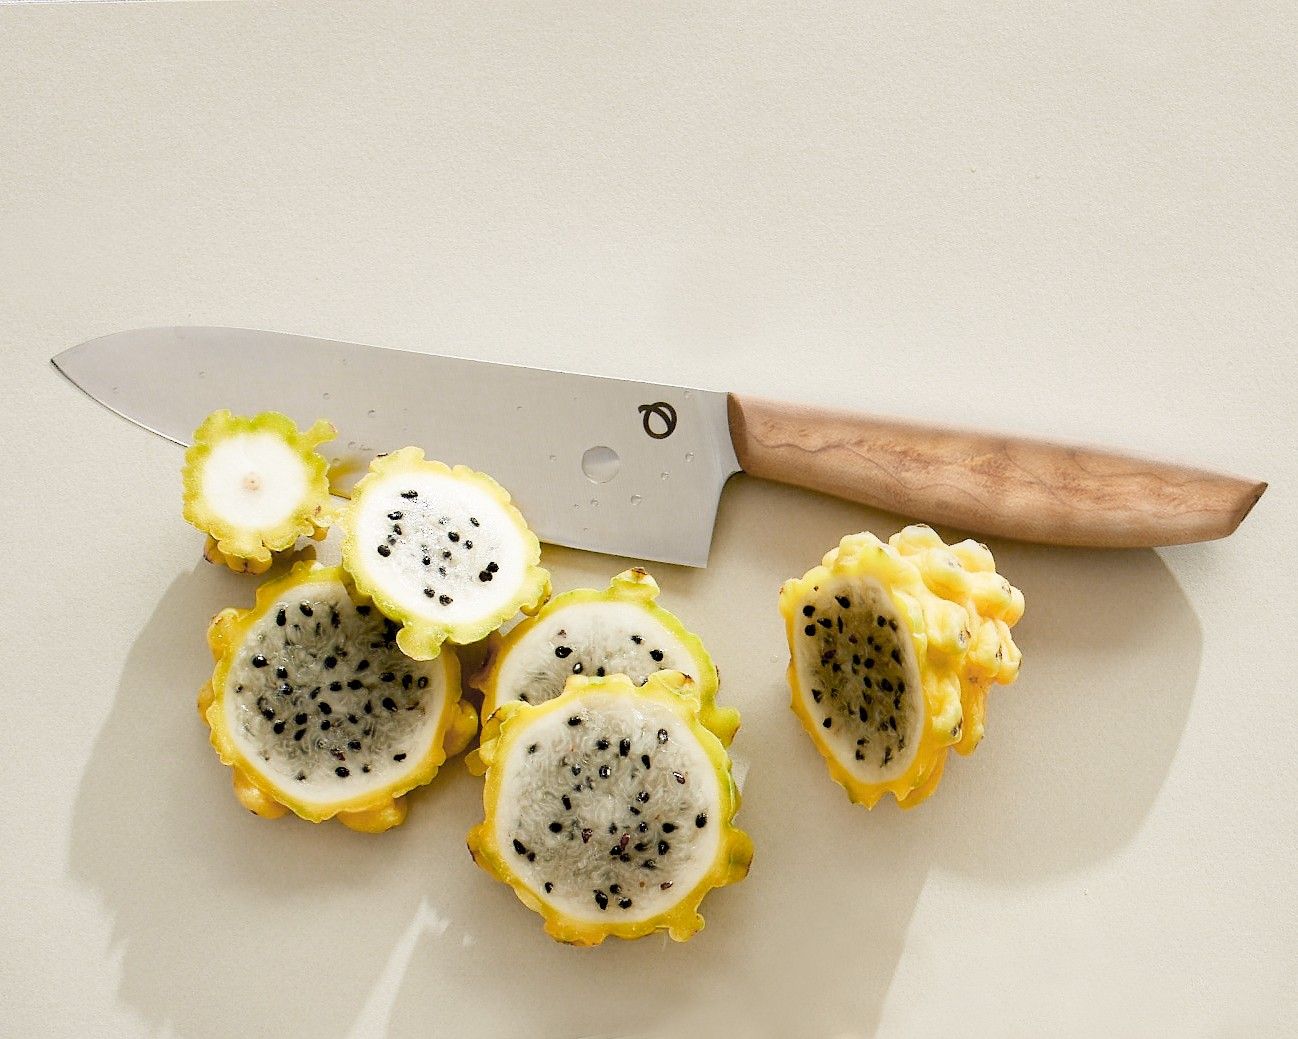 Olavson Chef's knife from above with fruit